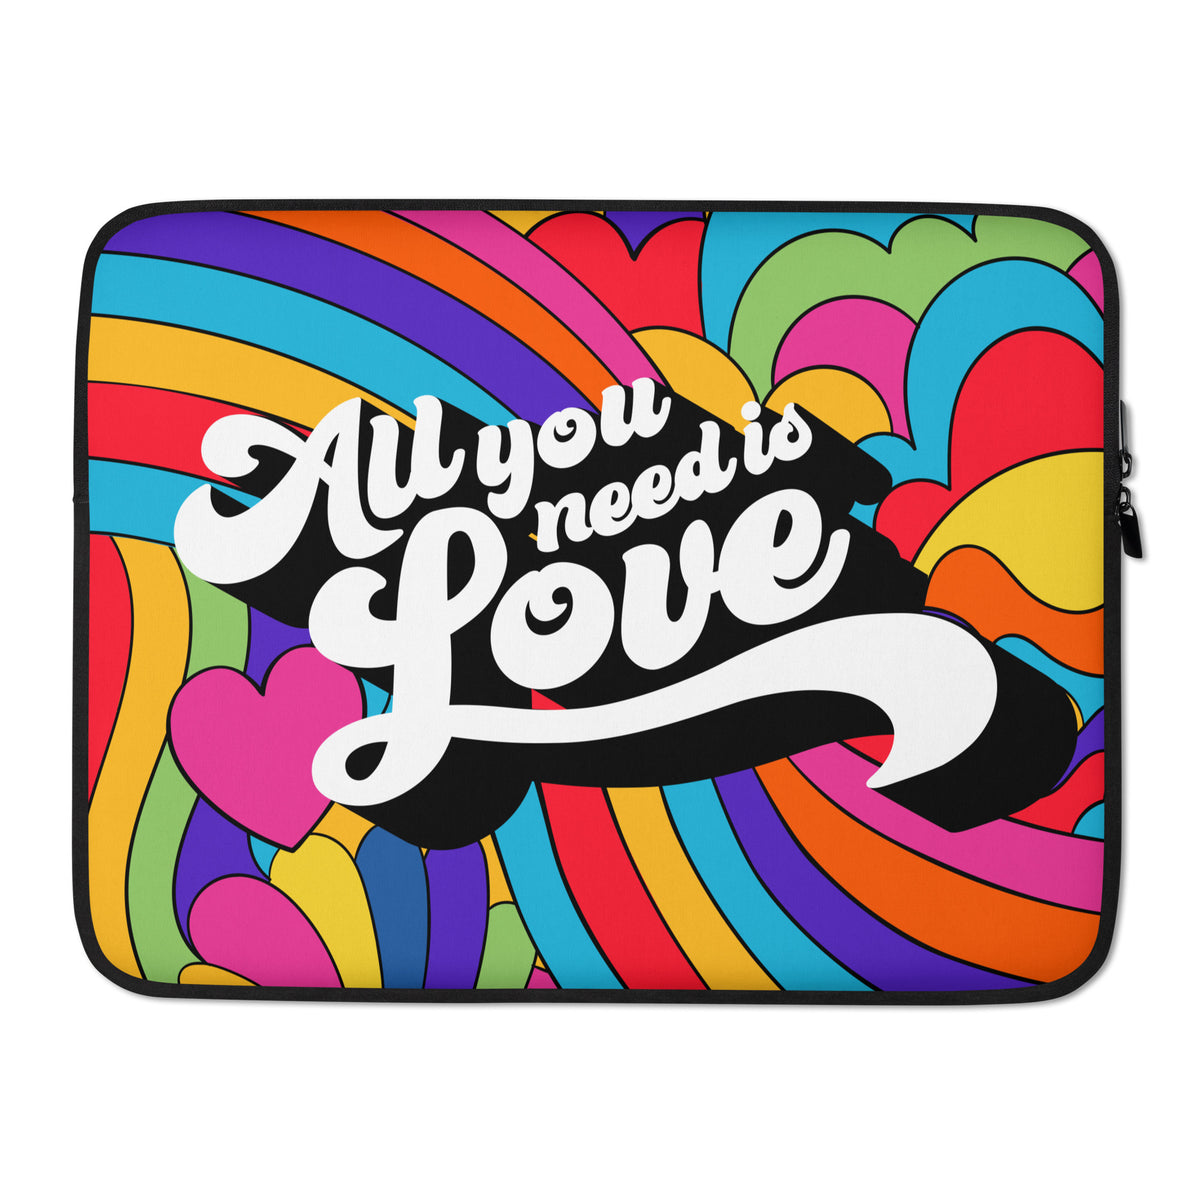 All You Need is Love Laptop Sleeve